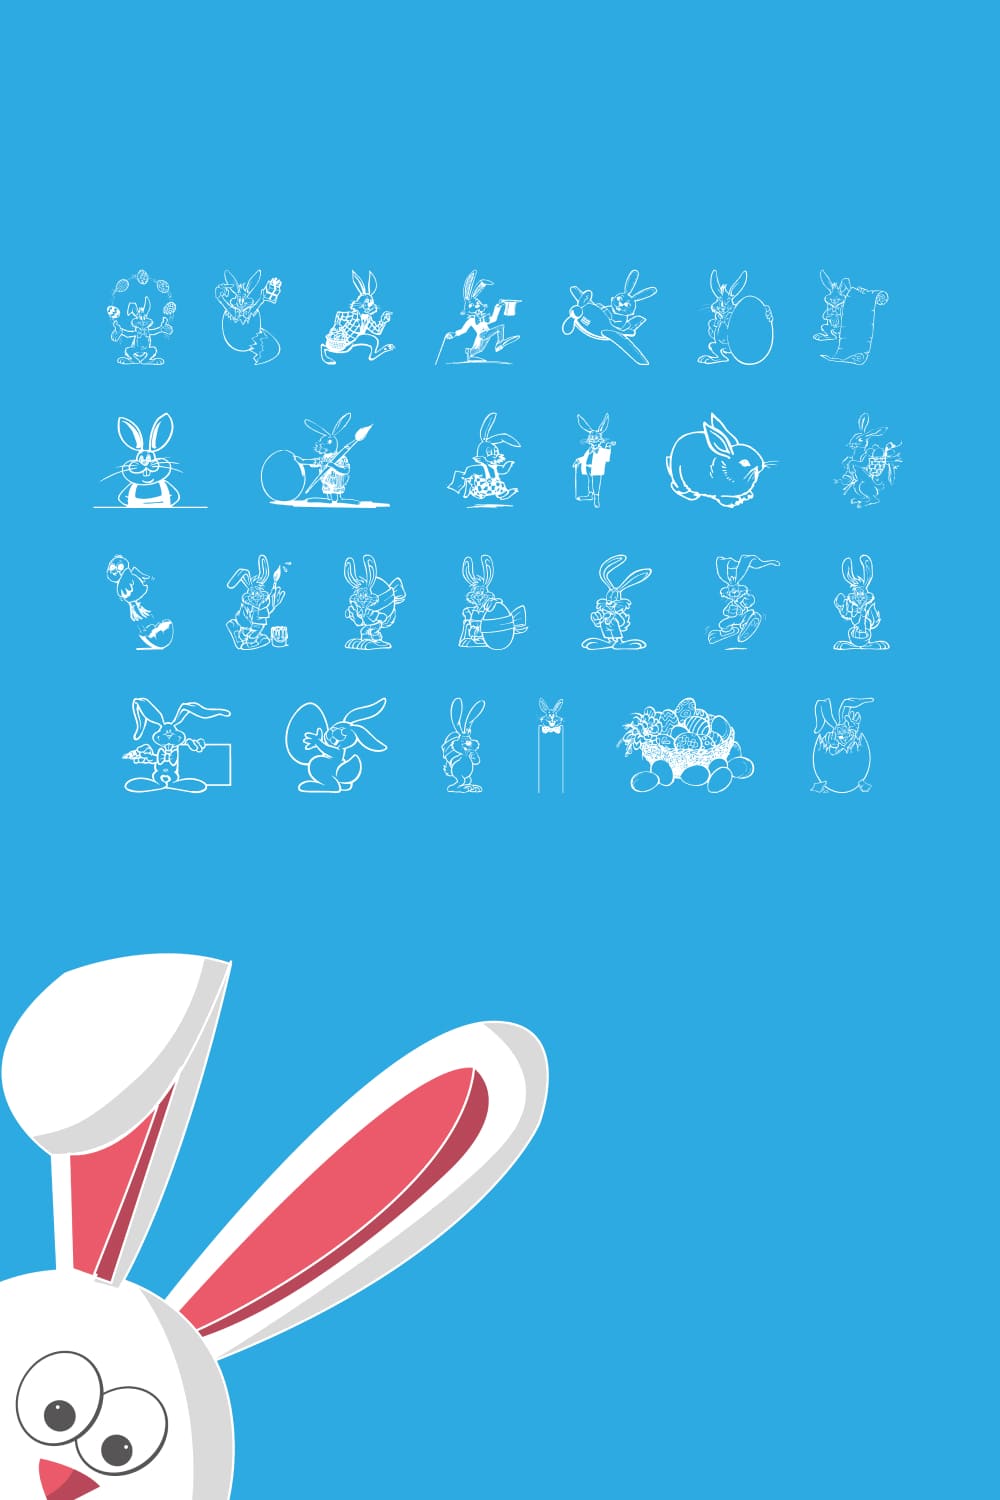 Scetches of bunny on blue background.